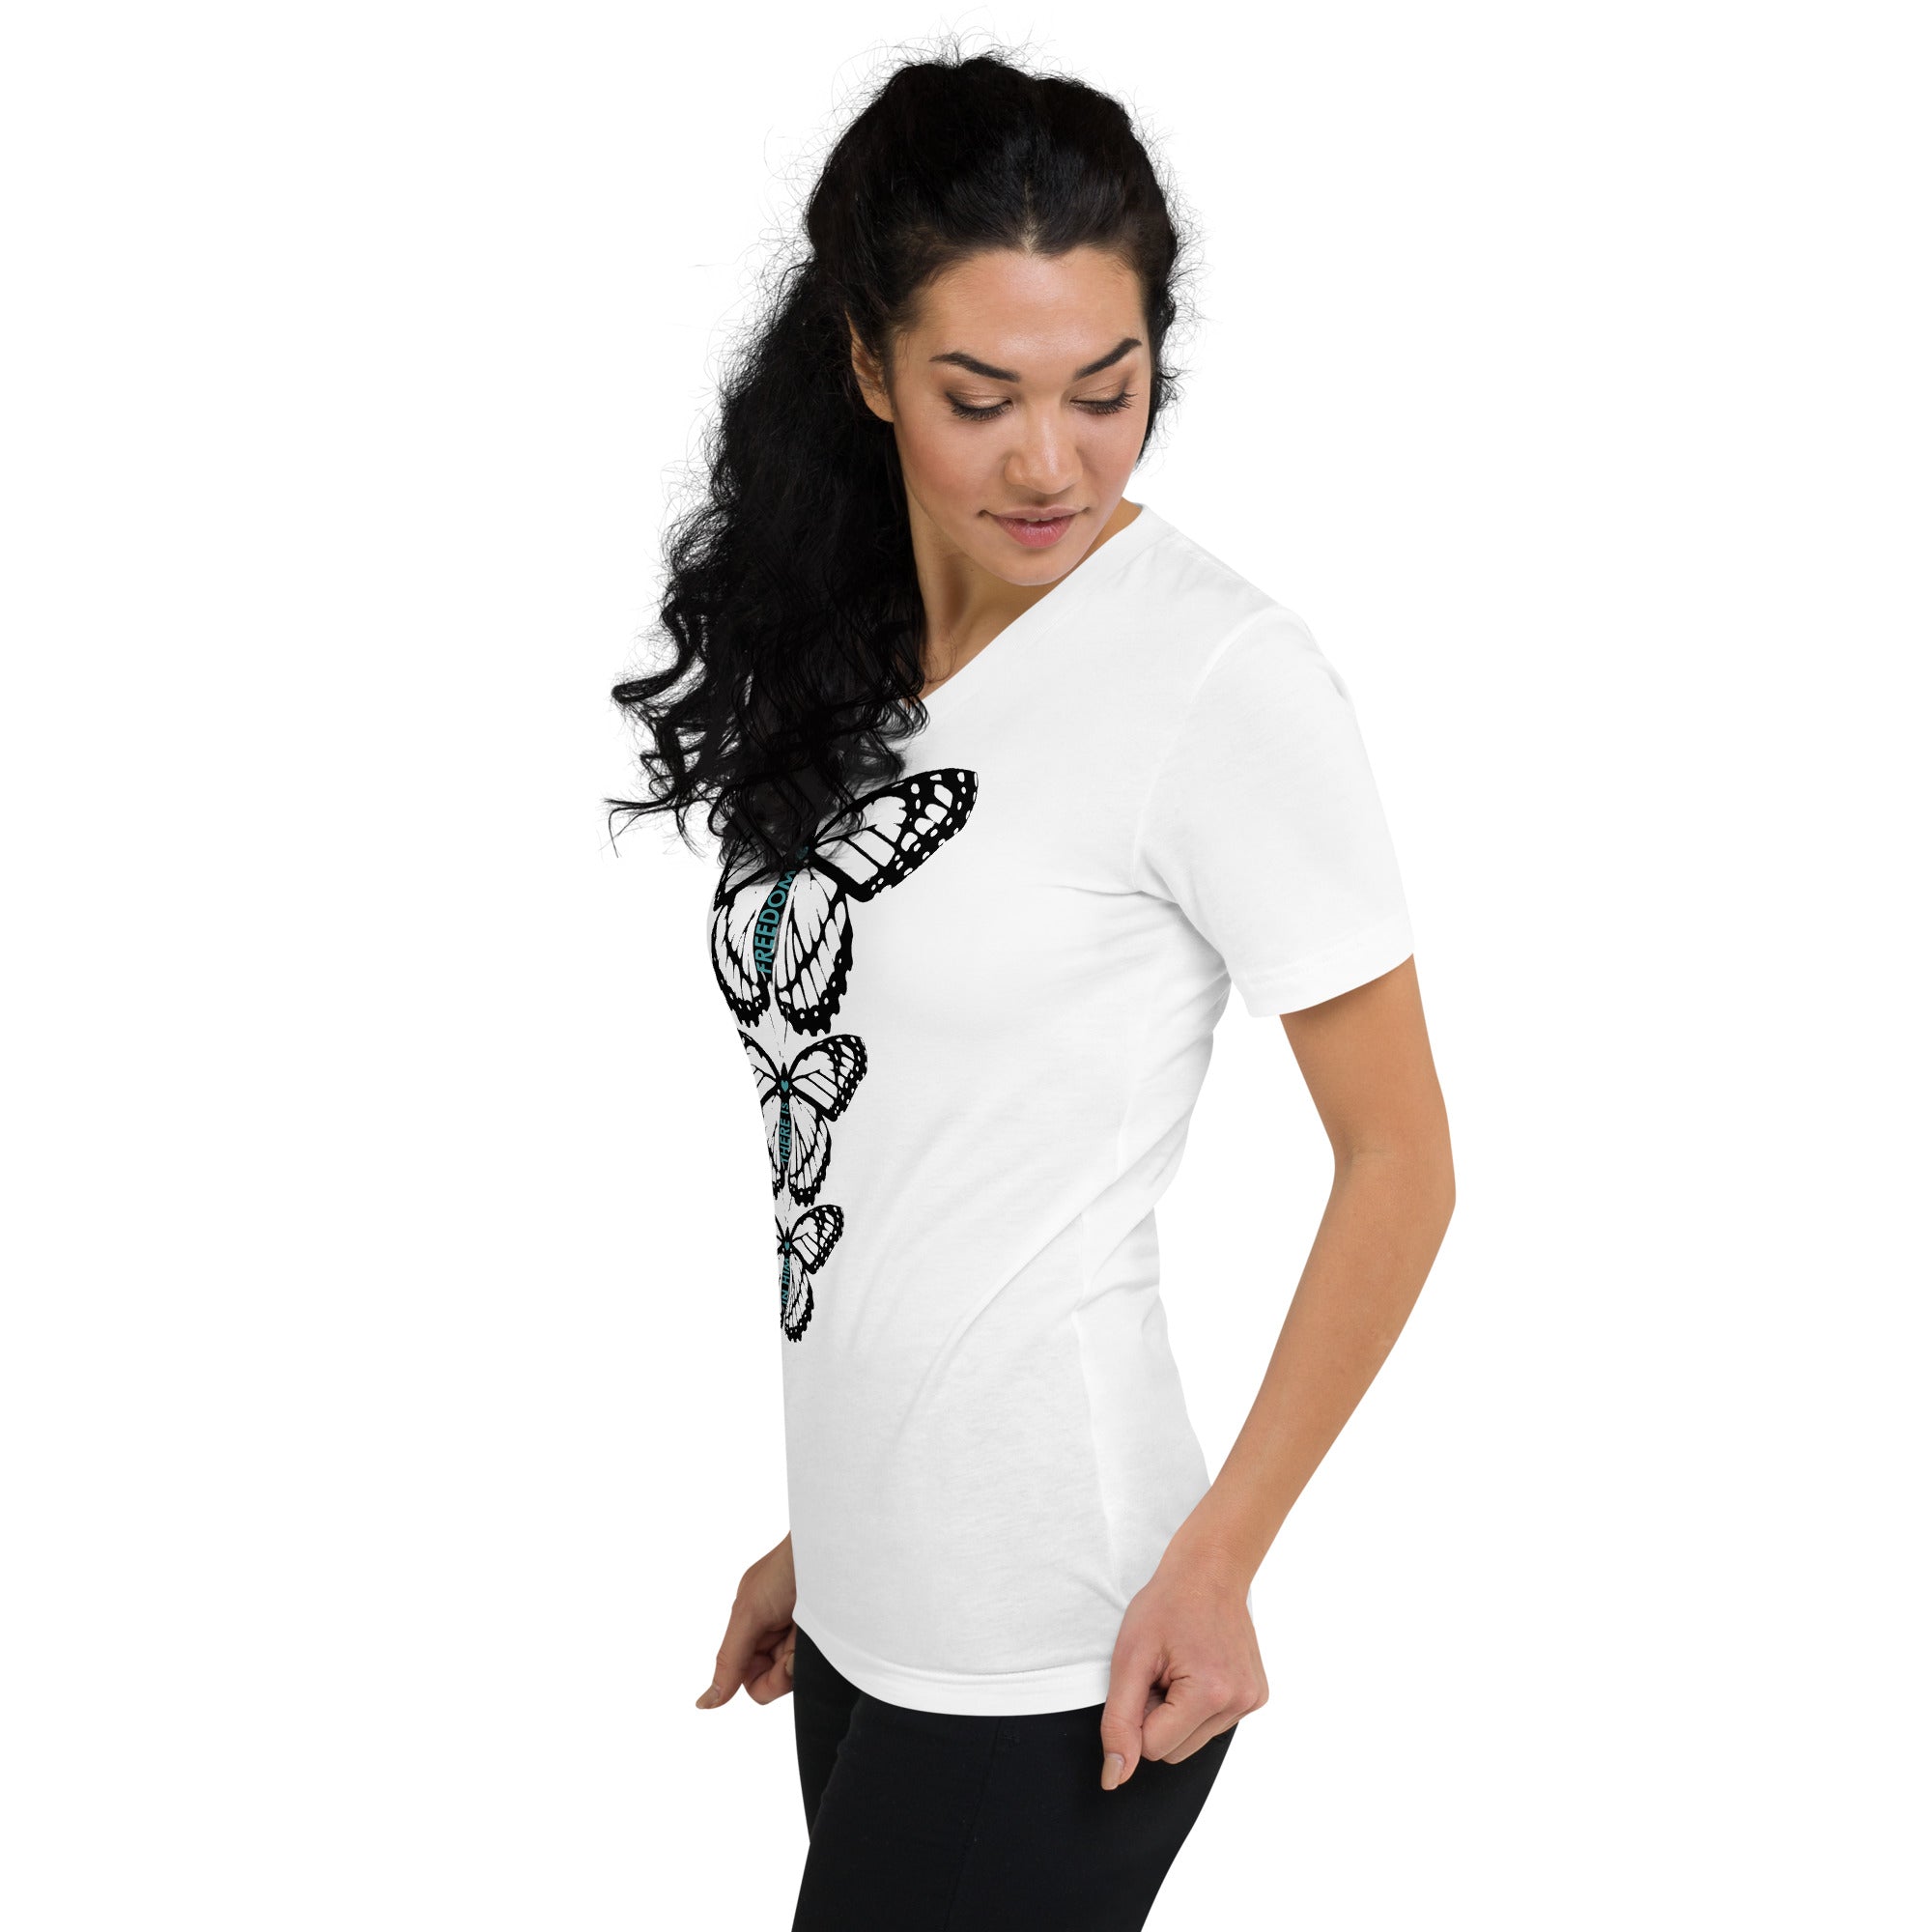 In Him There is Freedom ~ Butterfly Graphic T-Shirt, Unisex